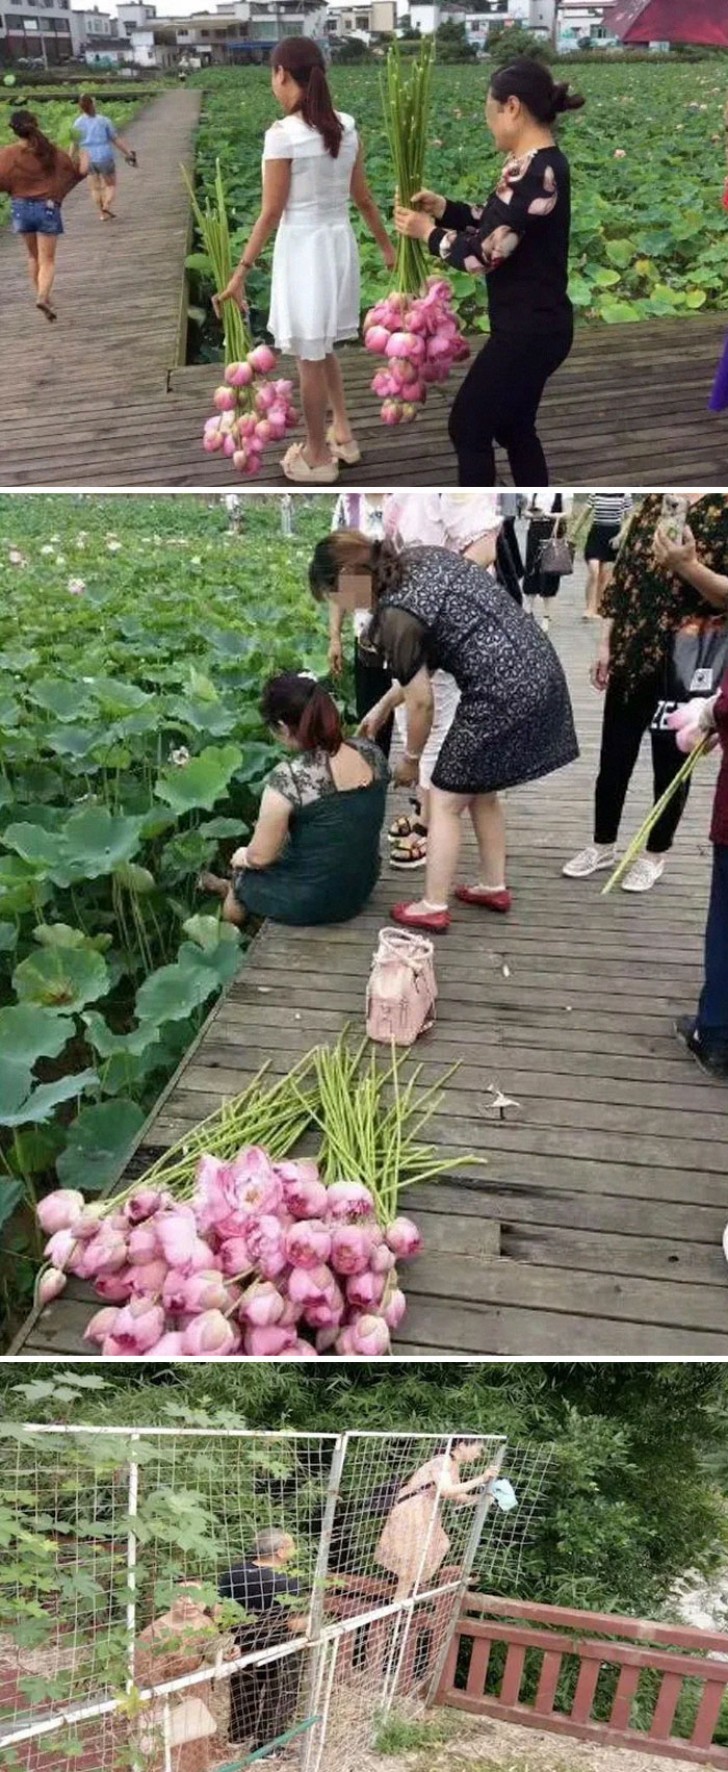 At the Sichuan Ecological Park in China, tourists stripped all the lotus flowers of their petals ...